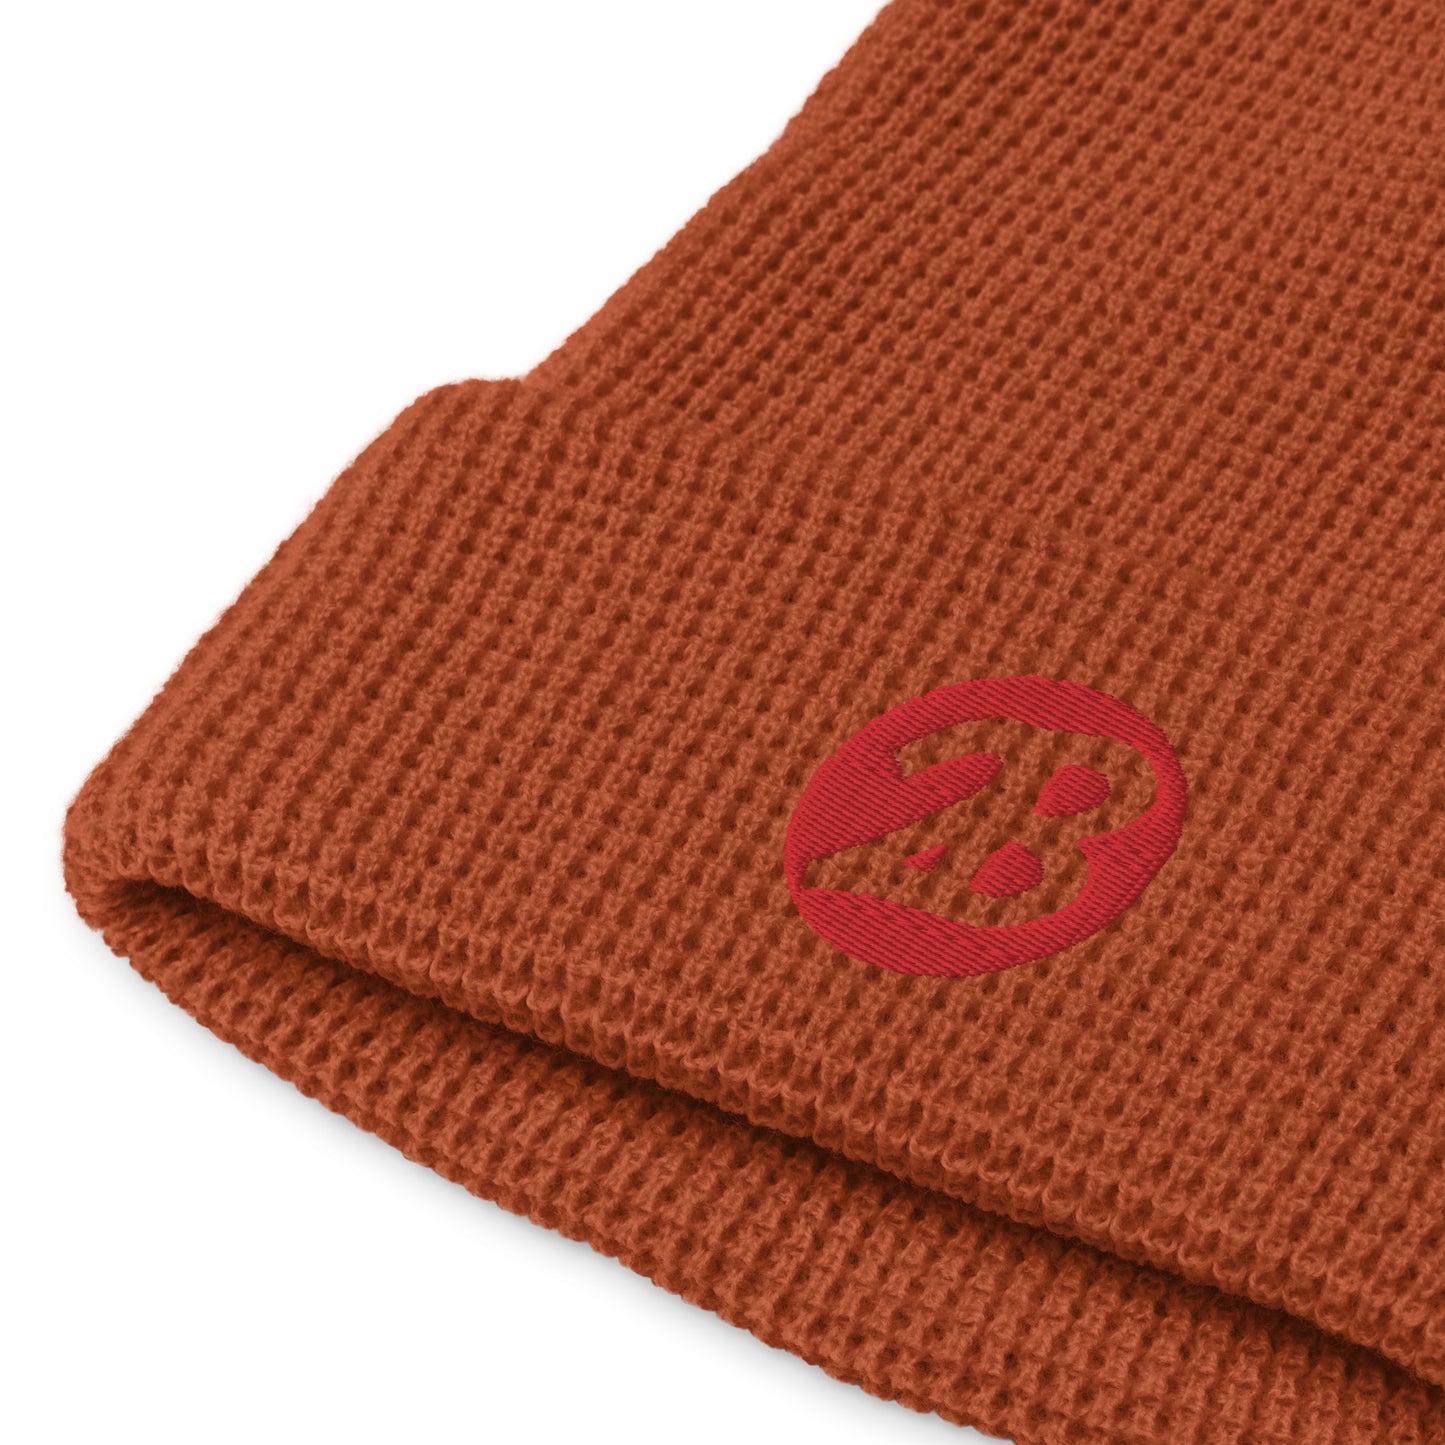 2Bdiscontinued. embroidered richardson waffle beanie 2B